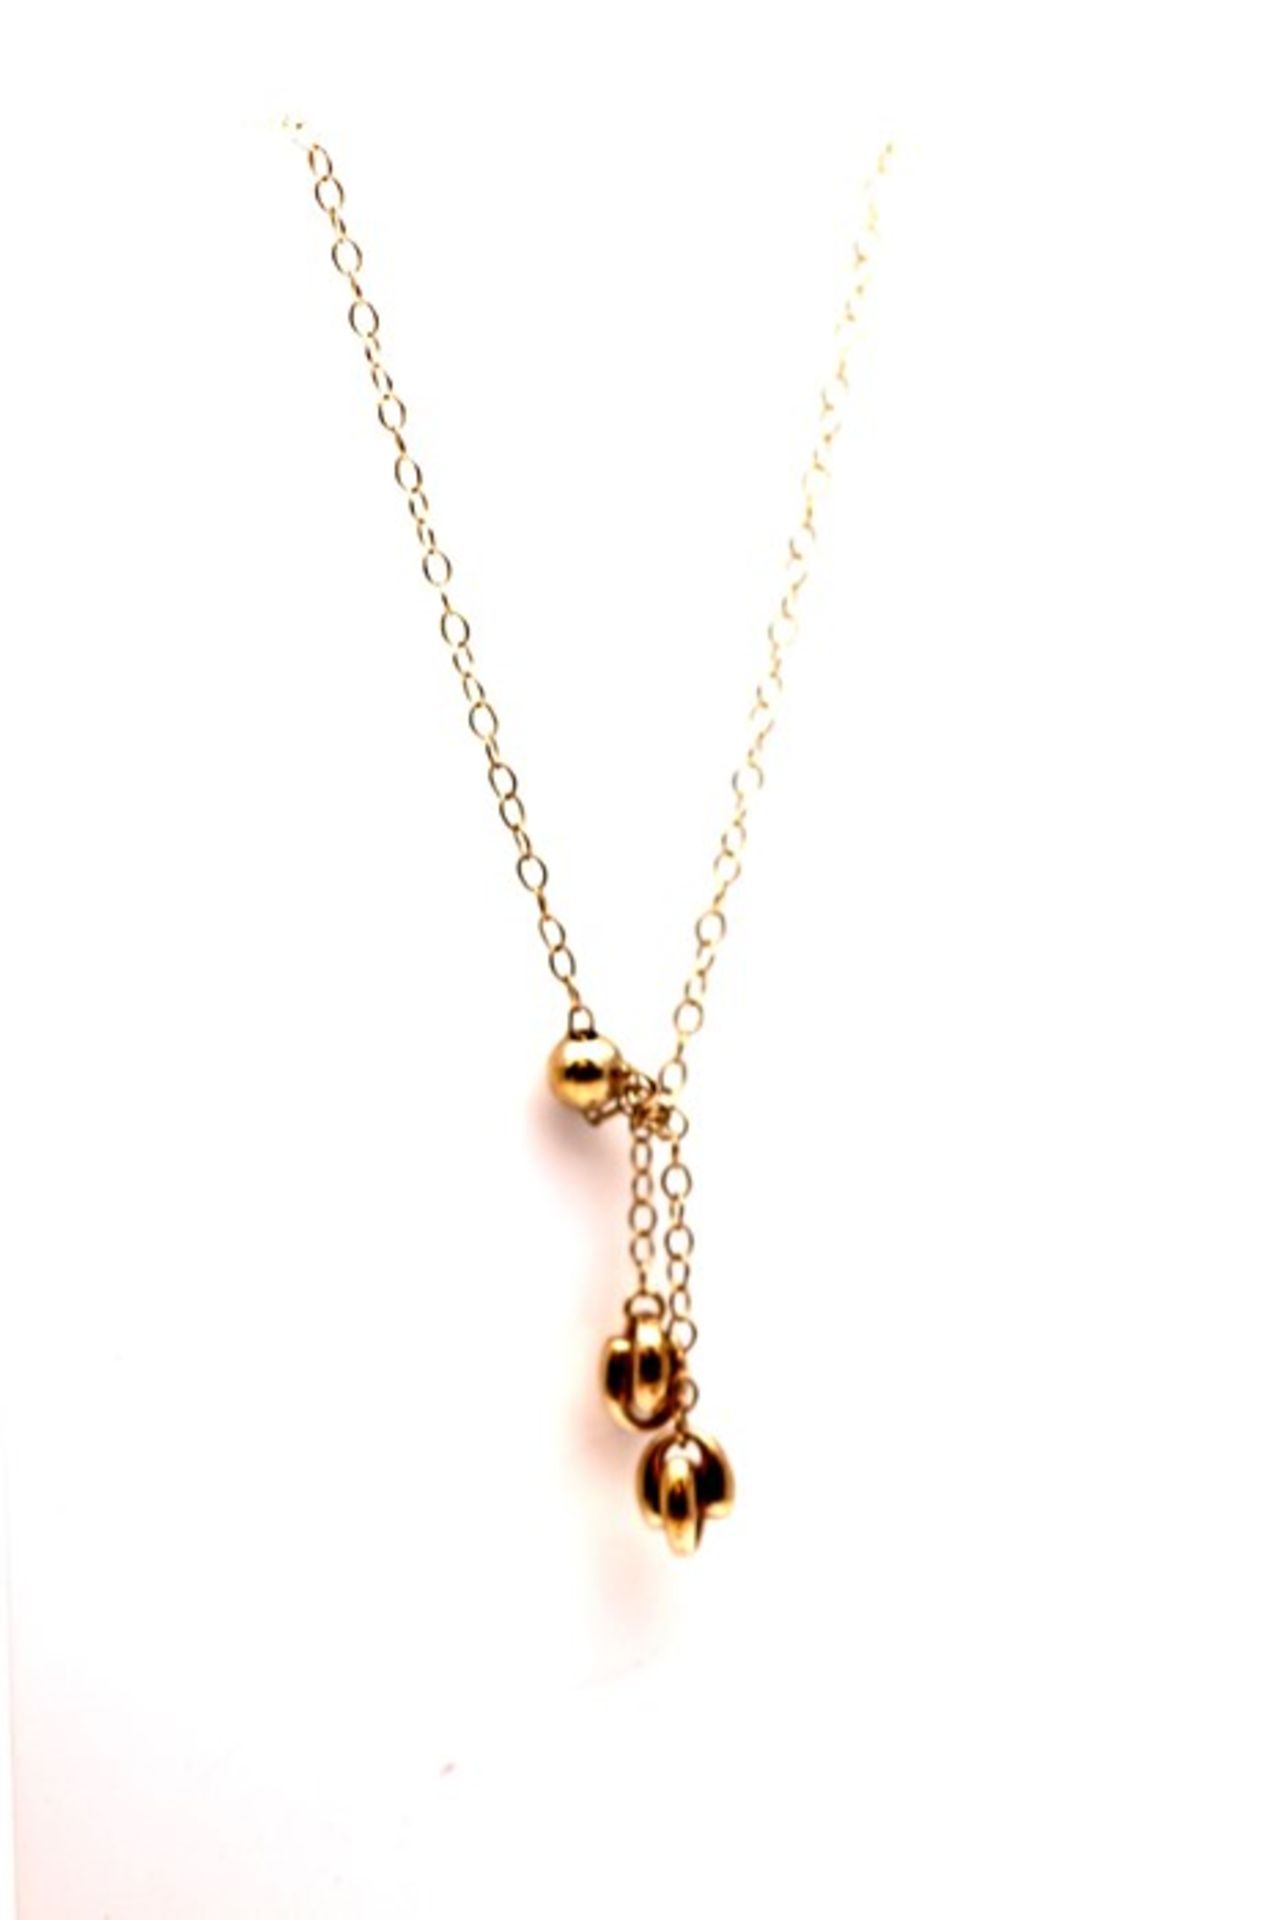 9CT YELLOW GOLD NECKLACE SET WITH THREE ROUND SHAPED DROPS